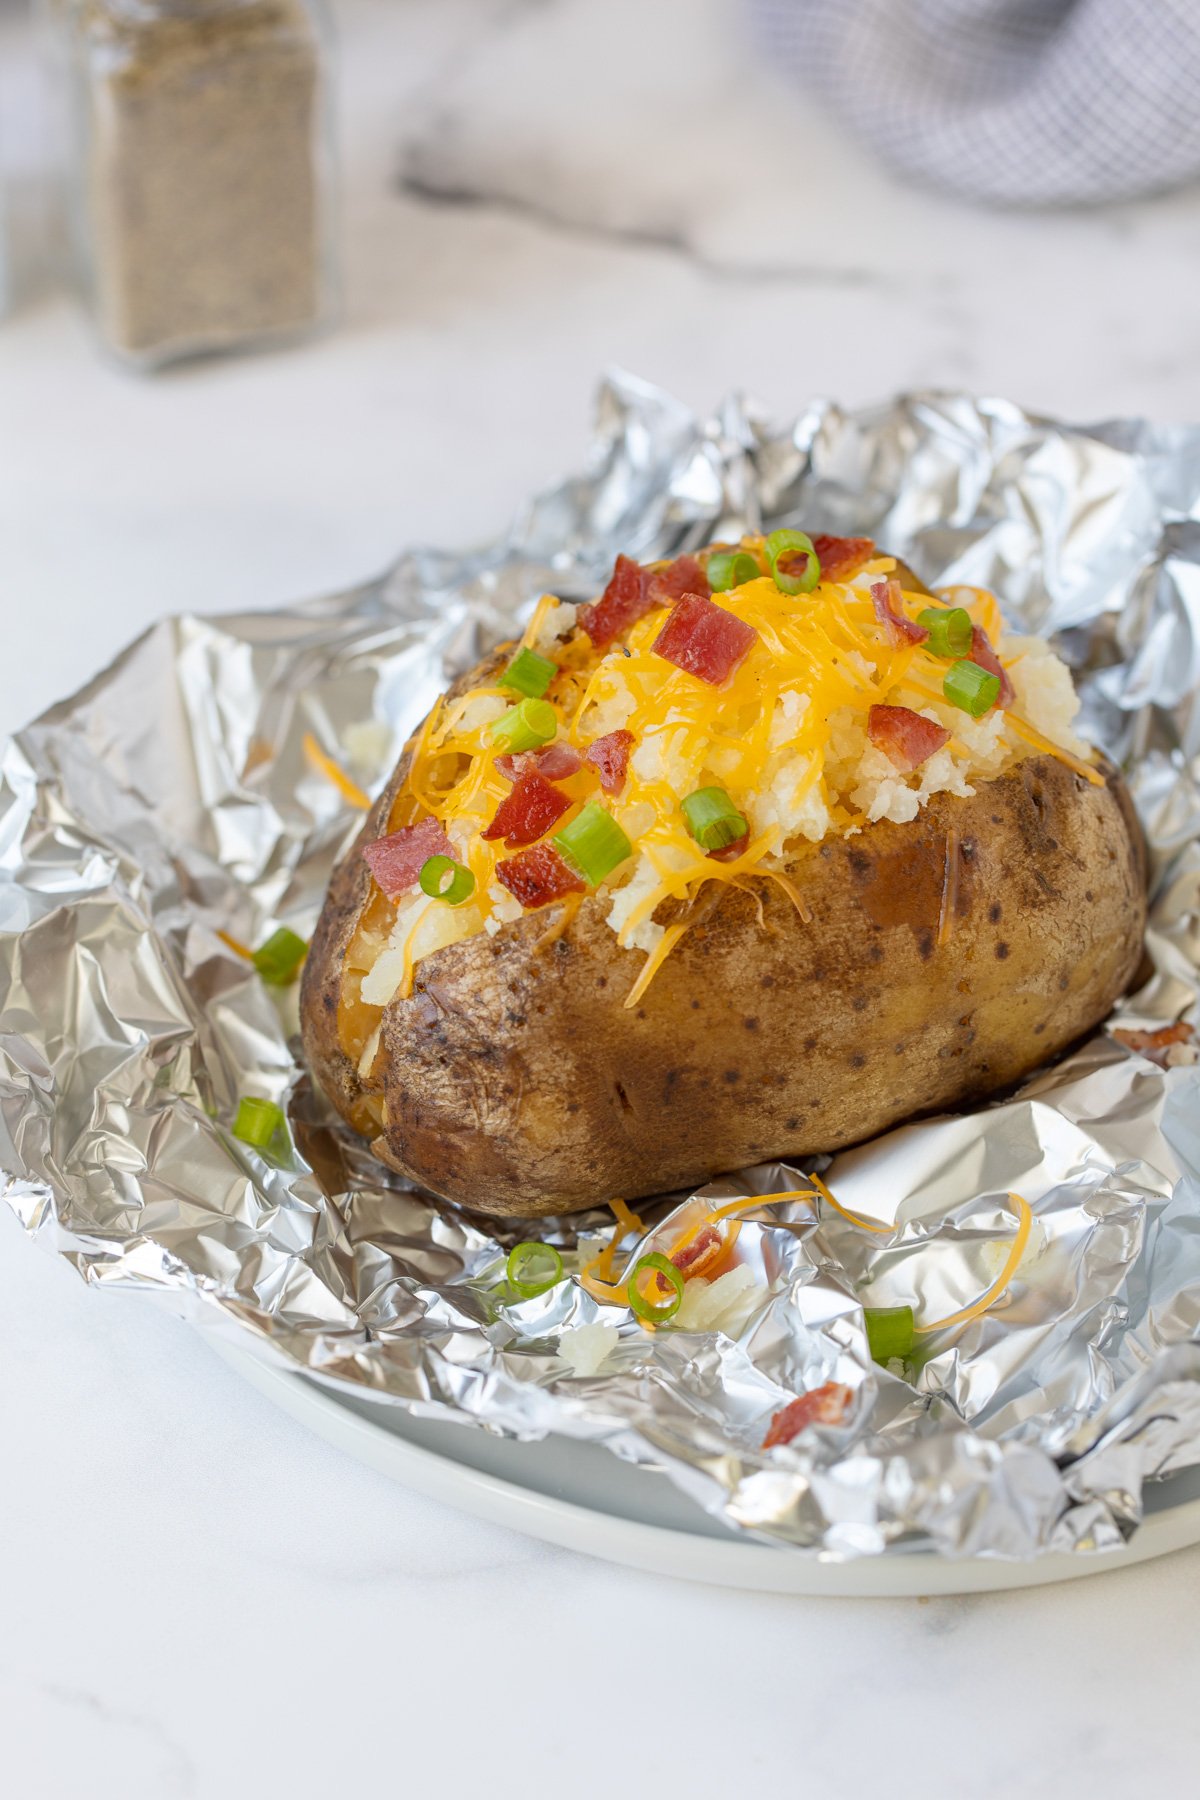 A baked potato topped with cheese, bacon and green onion on a piece of aluminum foil.